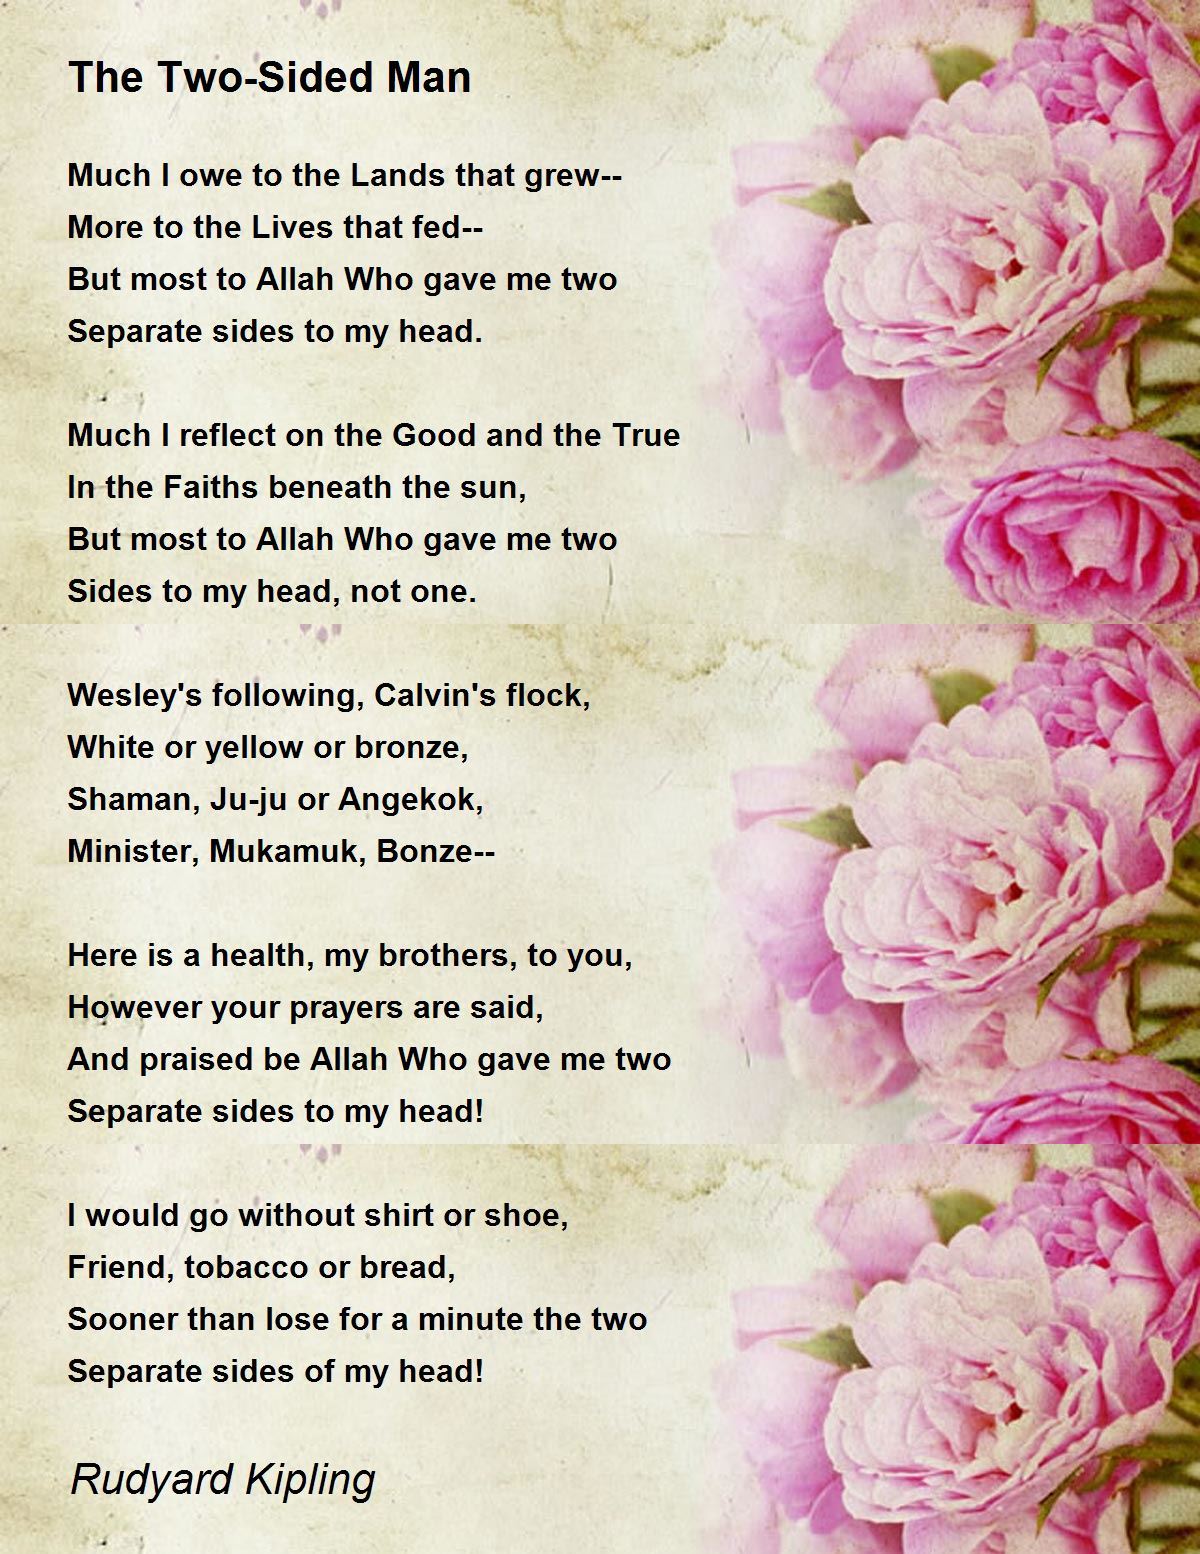 and family 3 worksheet friends Kipling The Two Poem Rudyard  by Sided Hunter Poem  Man